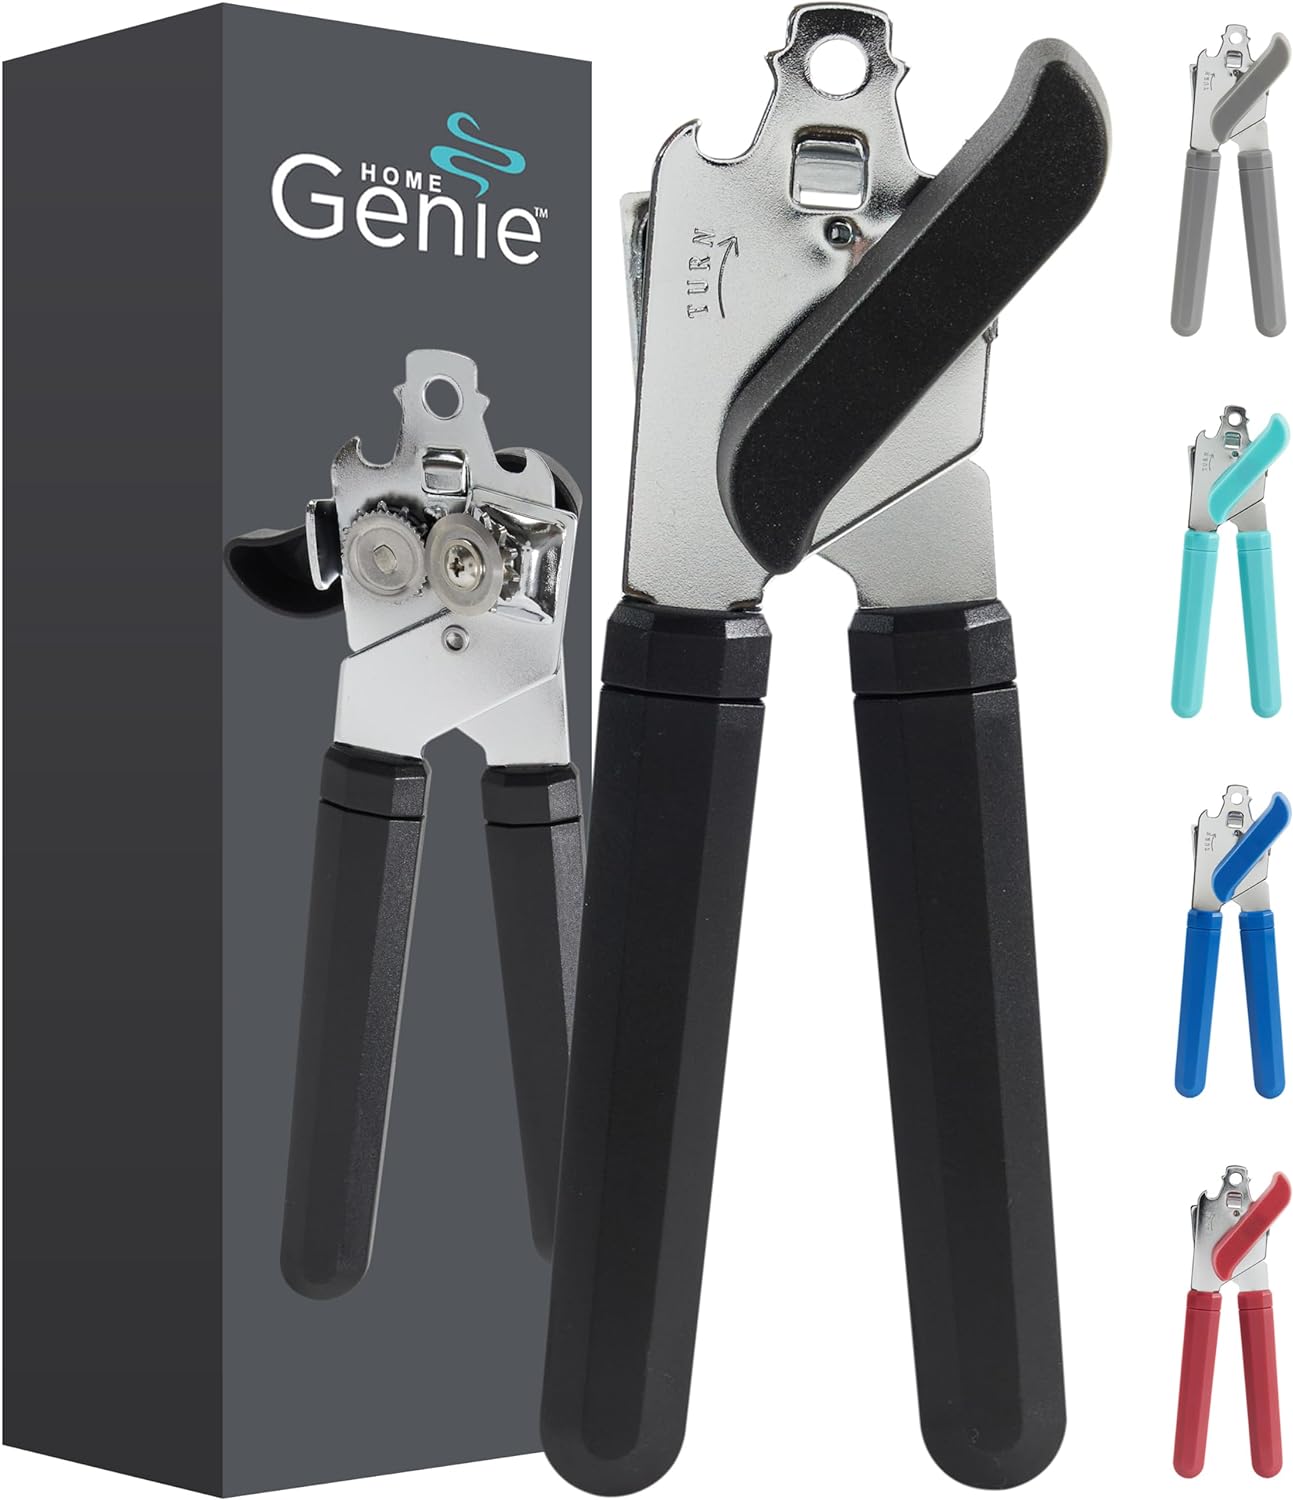 Home Genie Strong Stainless Steel Manual Can Opener